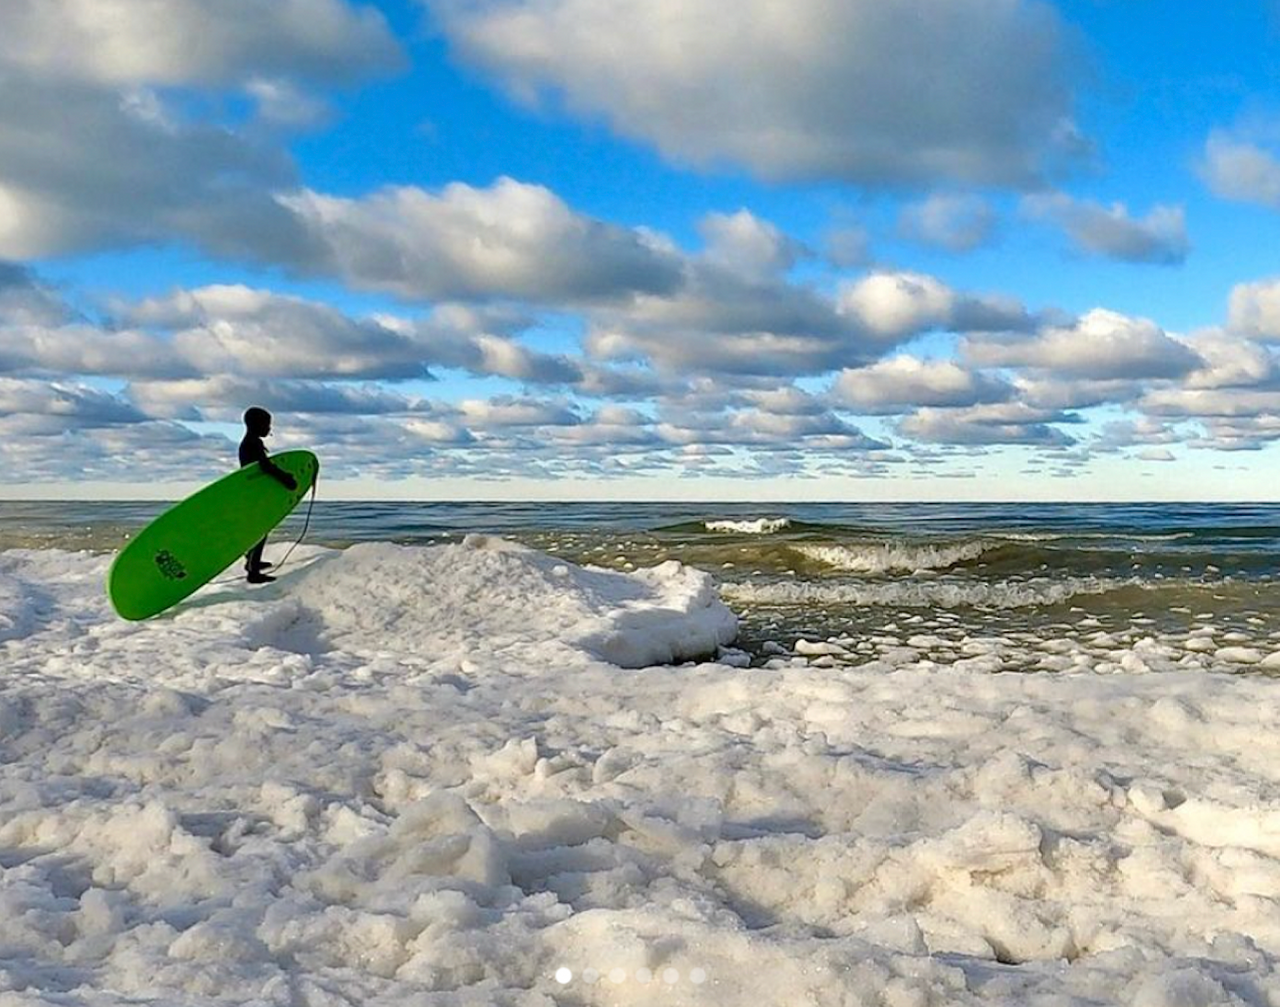 Jameson Walter, 11, contemplates a winter surf session on Lake Michigan, where he has been catching waves since the age of six.